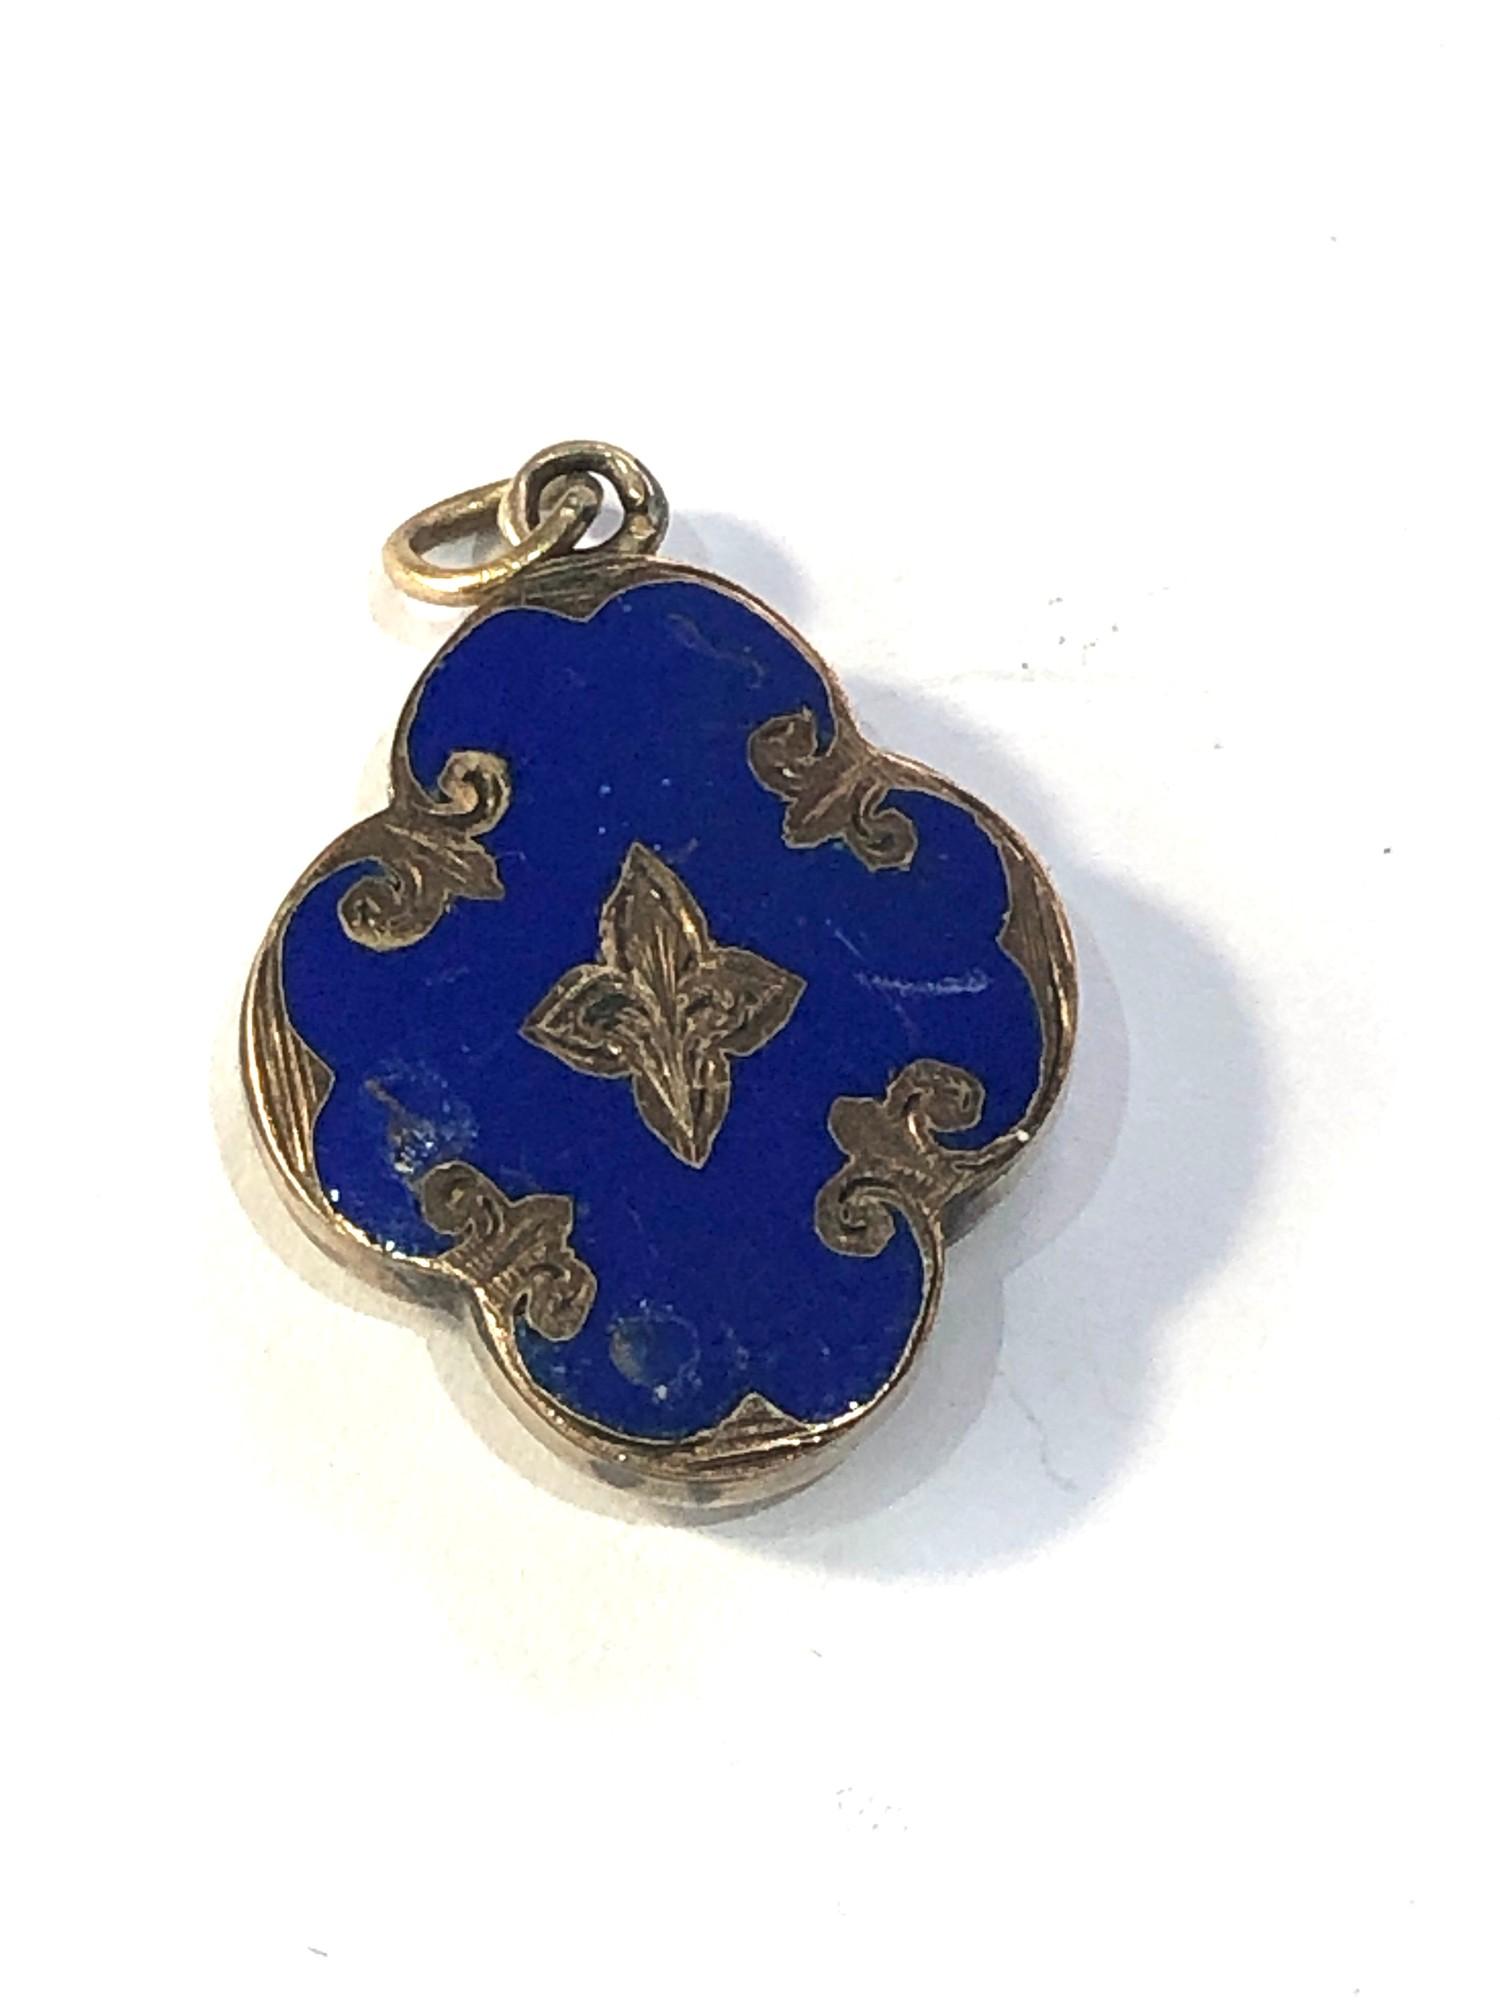 Antique gold enamel mourning hair locket pendant measures approx 2.3cm drop by 17mm wide